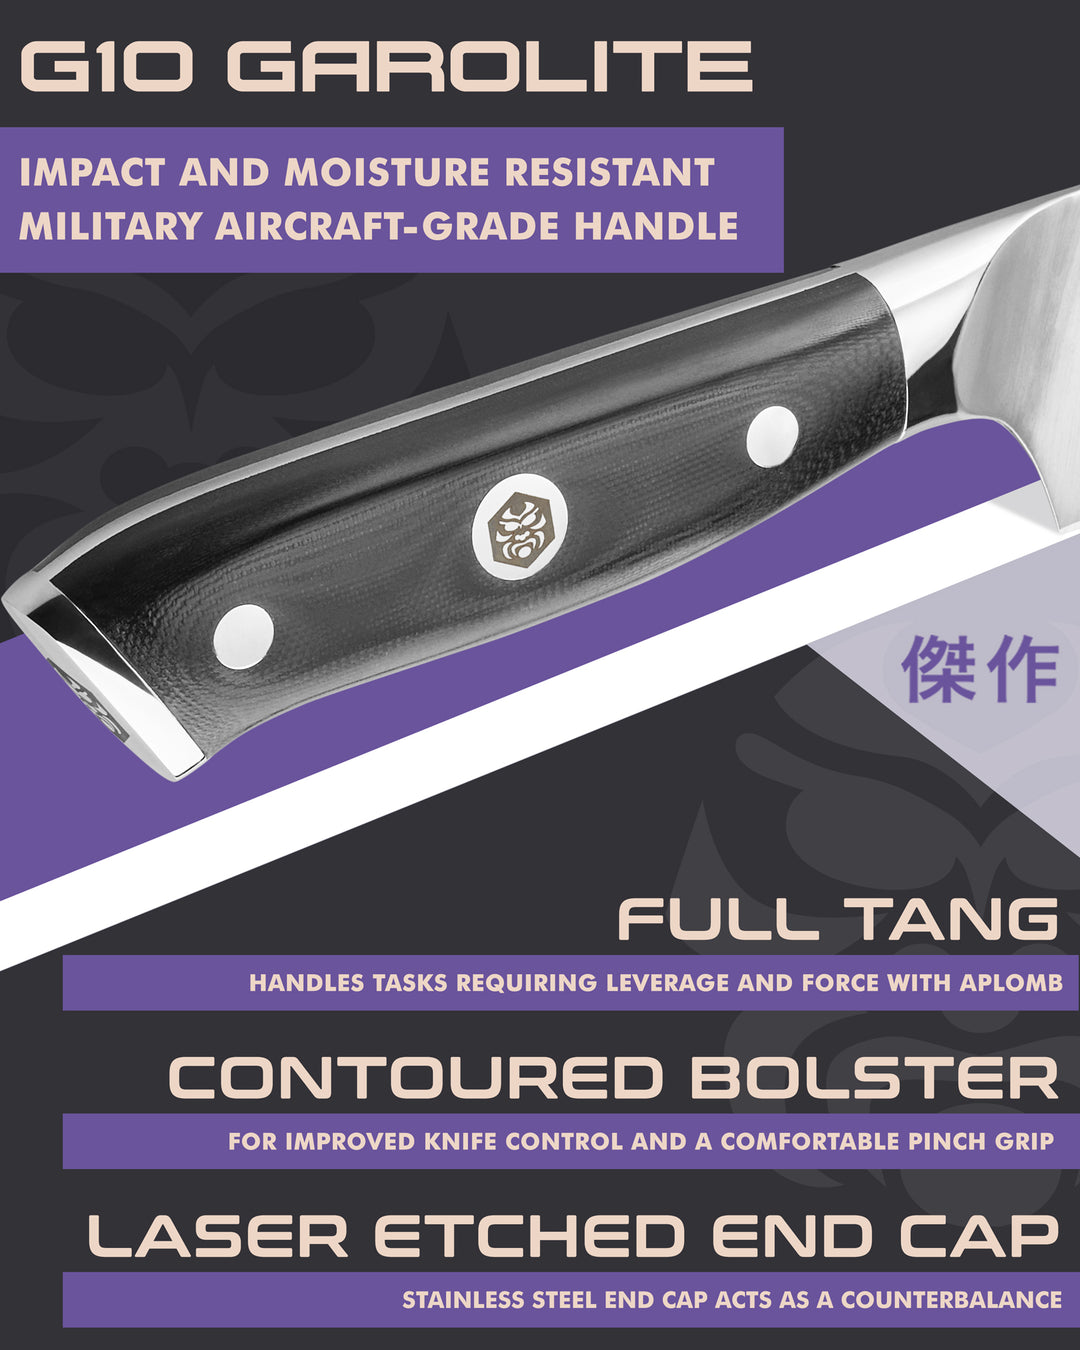 Kessaku Dynasty Chef's Knife handle features: G10 handle, full tang, contoured bolster, laser etched end cap